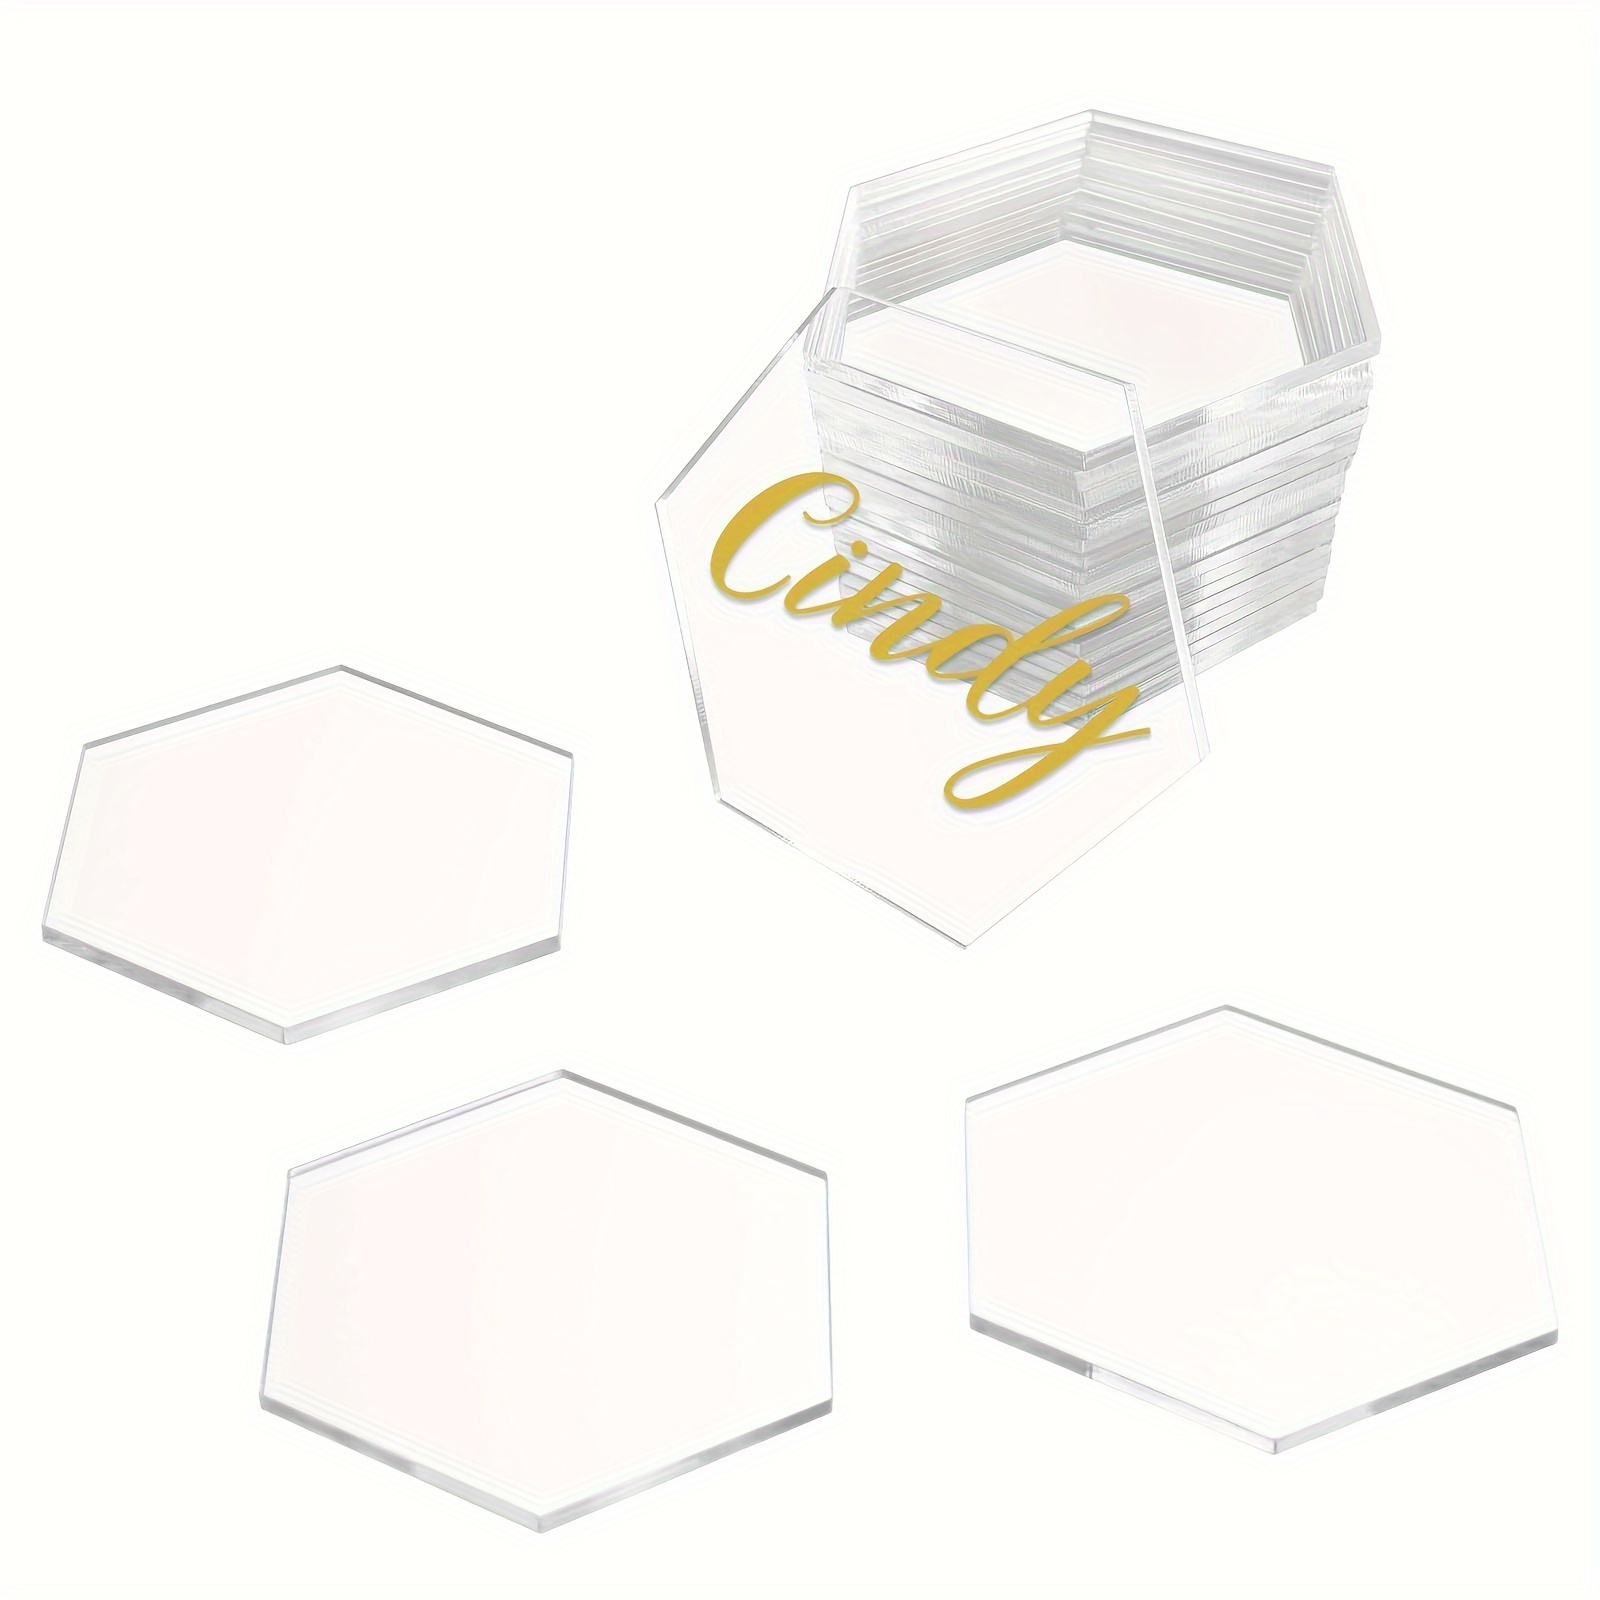  50PCS Clear Square Acrylic Sheet, 4 Inch Acrylic Square Blanks  Round Sheet Disc for Milestone Markers, Name Cards, Cricut Cutting and  Engraving, Painting and DIY Projects: Paintings